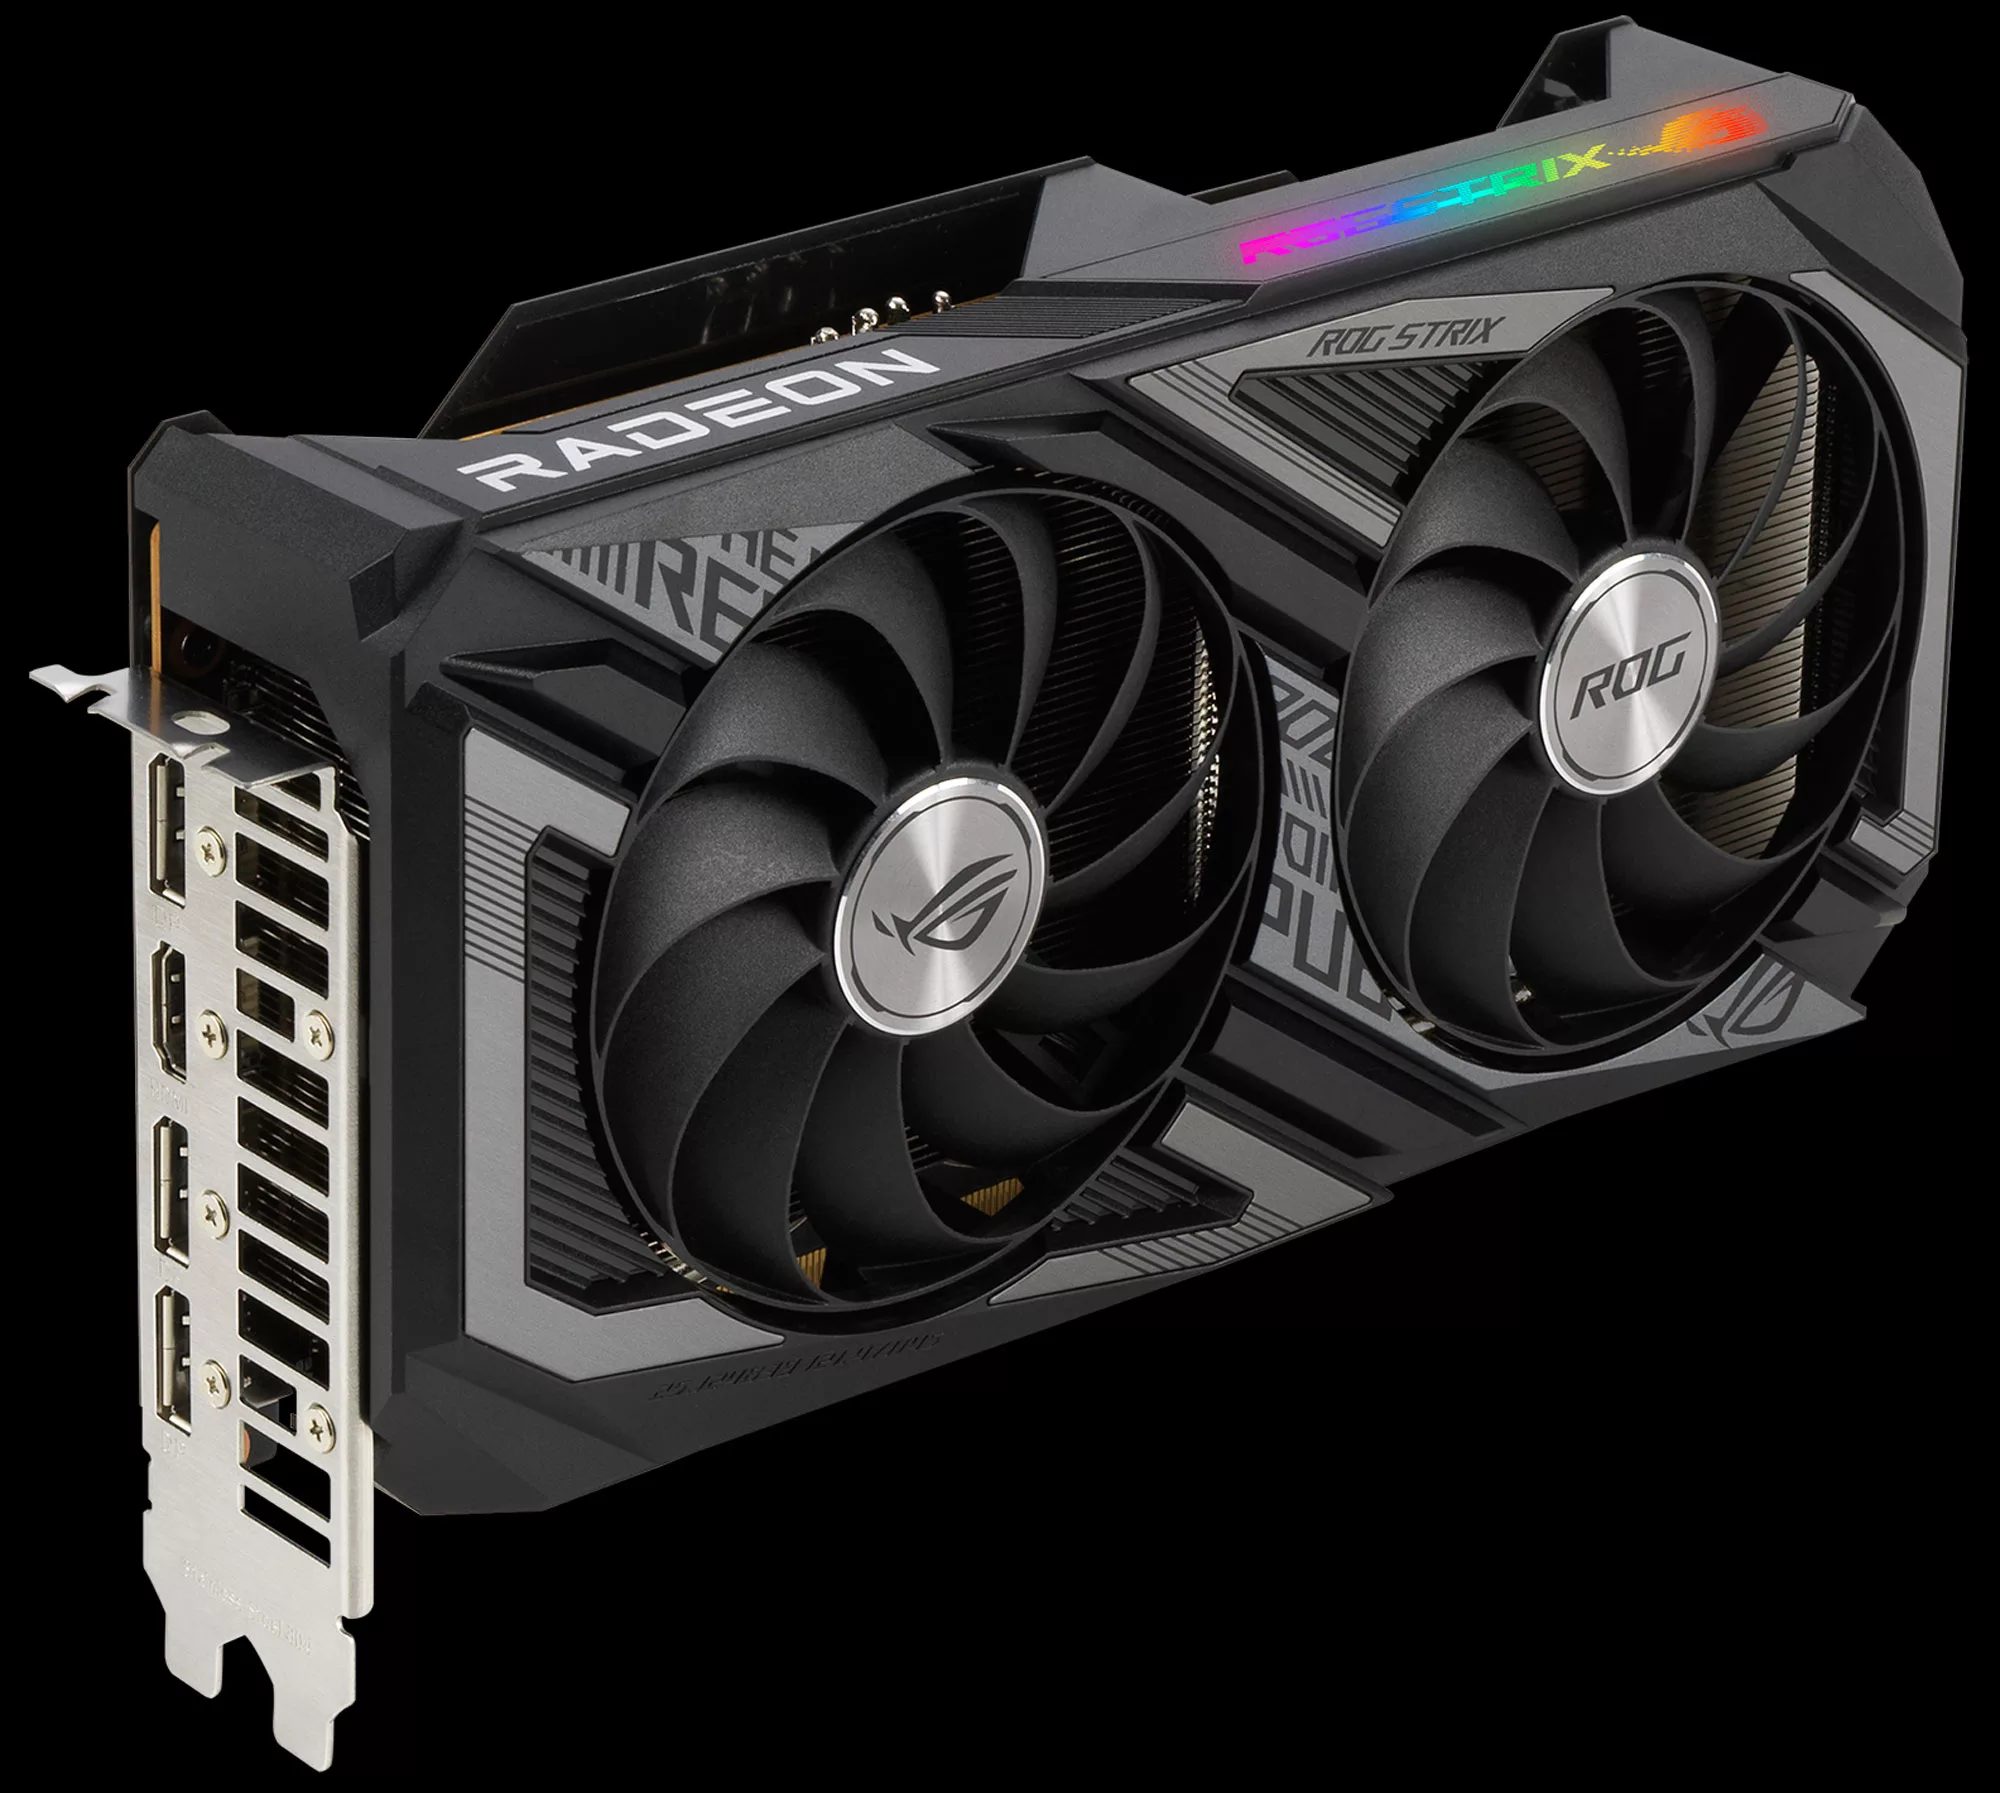 Radeon RX 6600 XT graphics cards bring RDNA 2 to the mainstream 